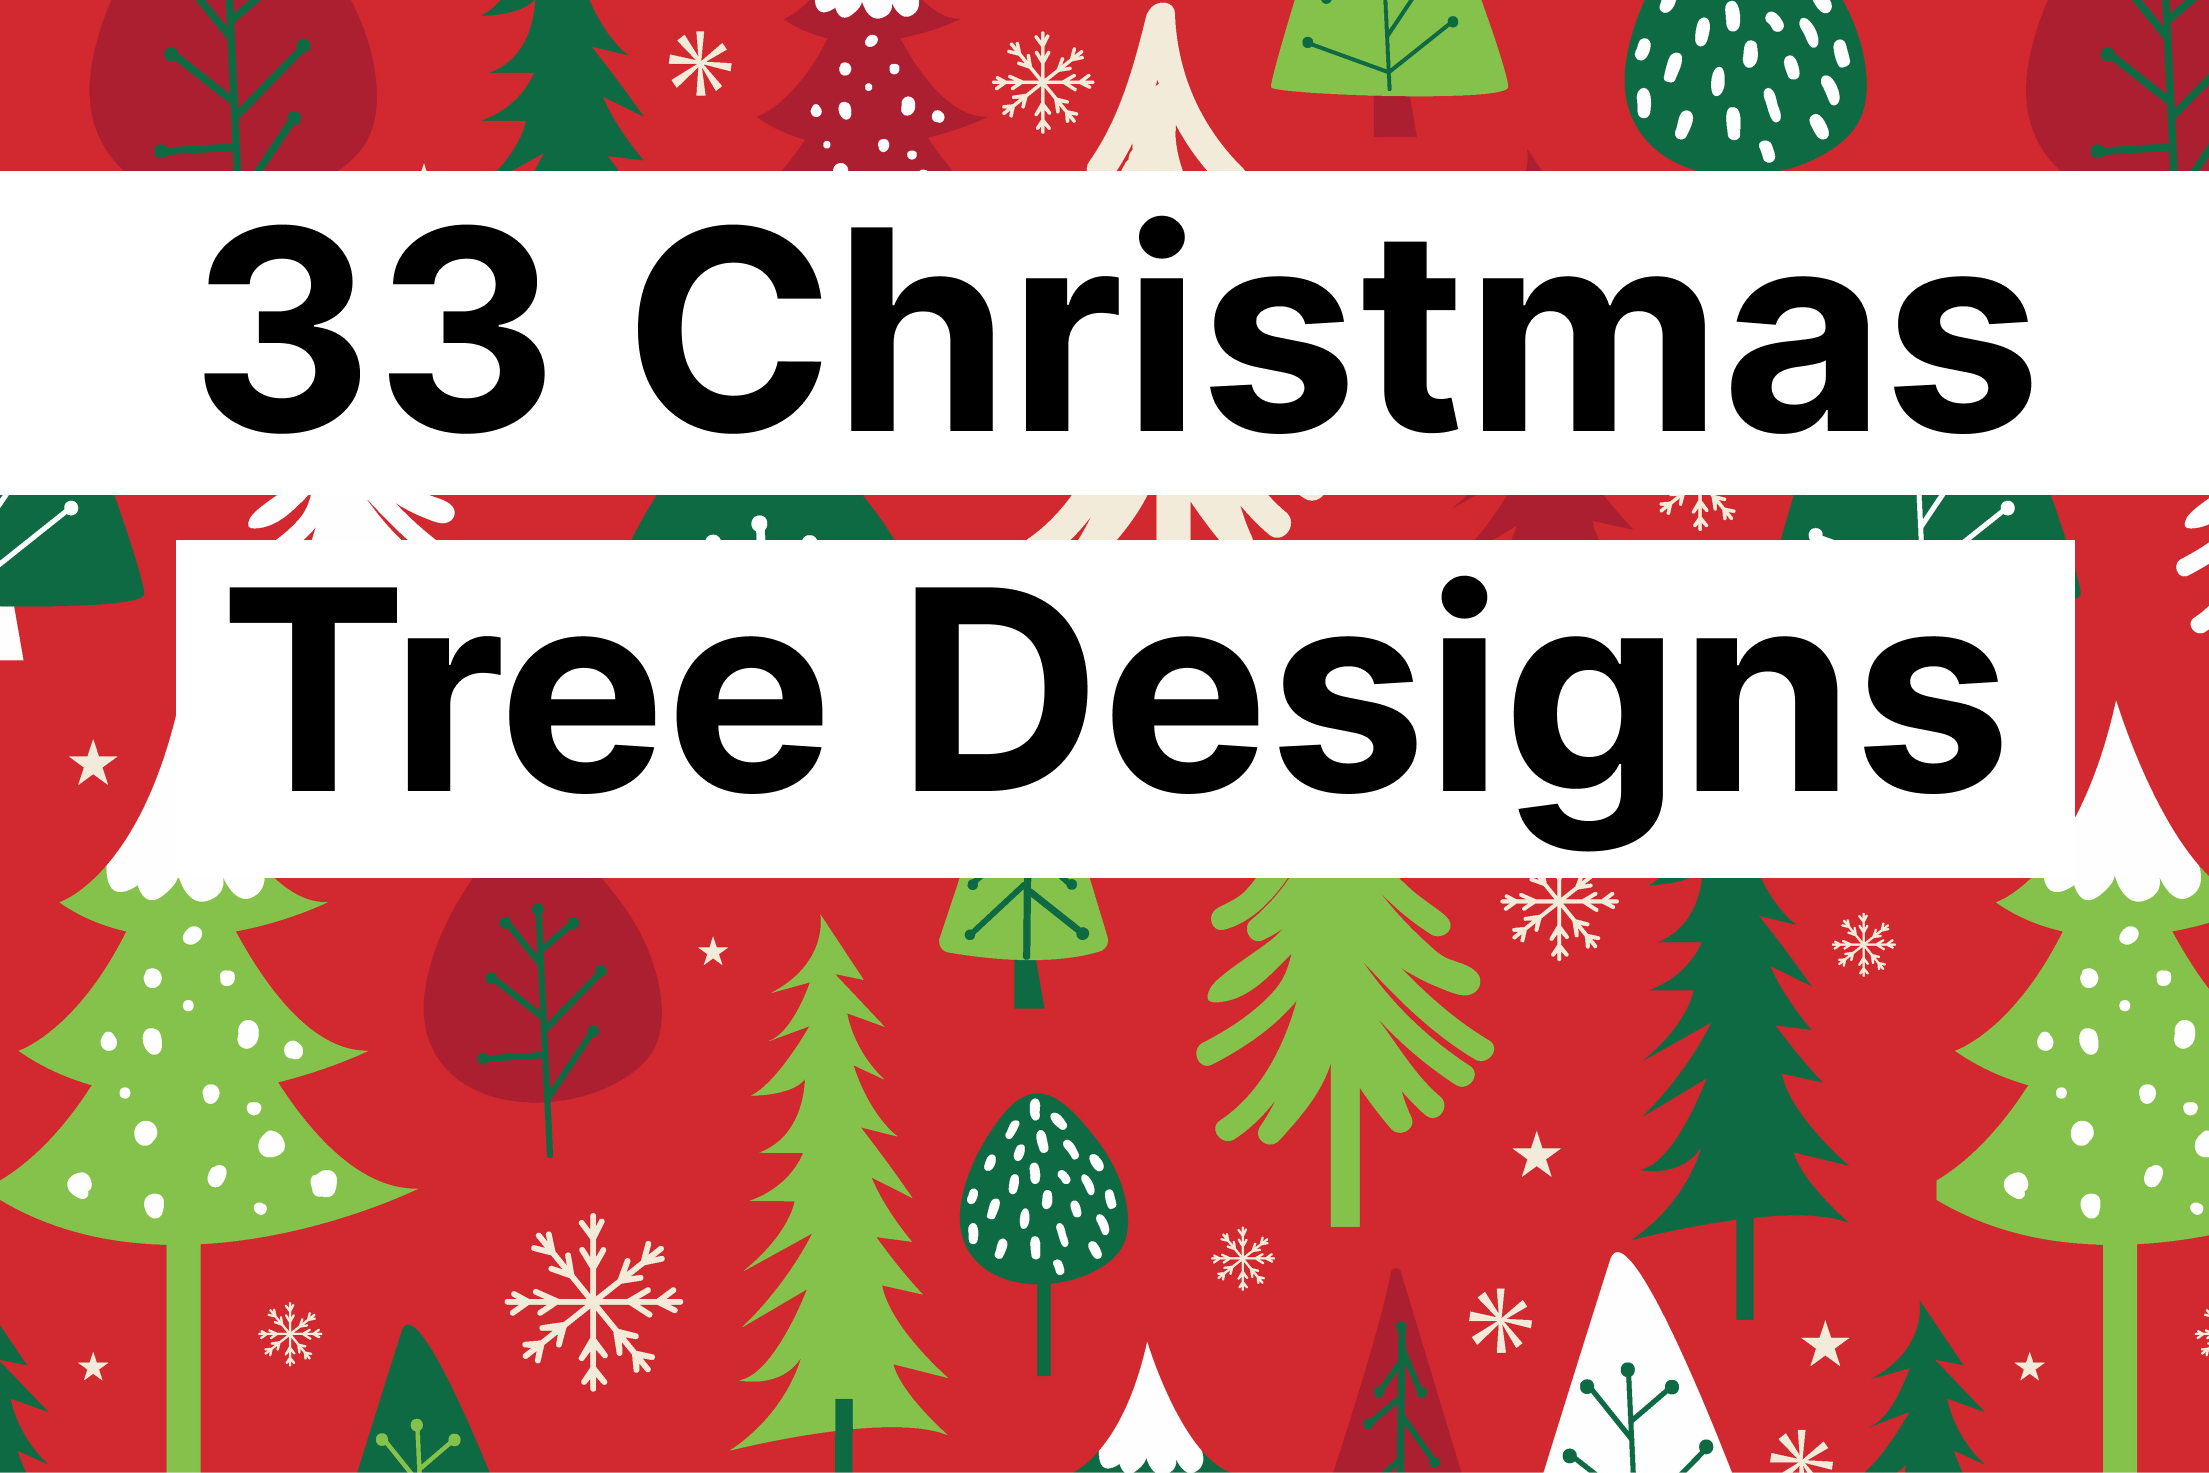 33 Christmas Tree Designs You Should Know